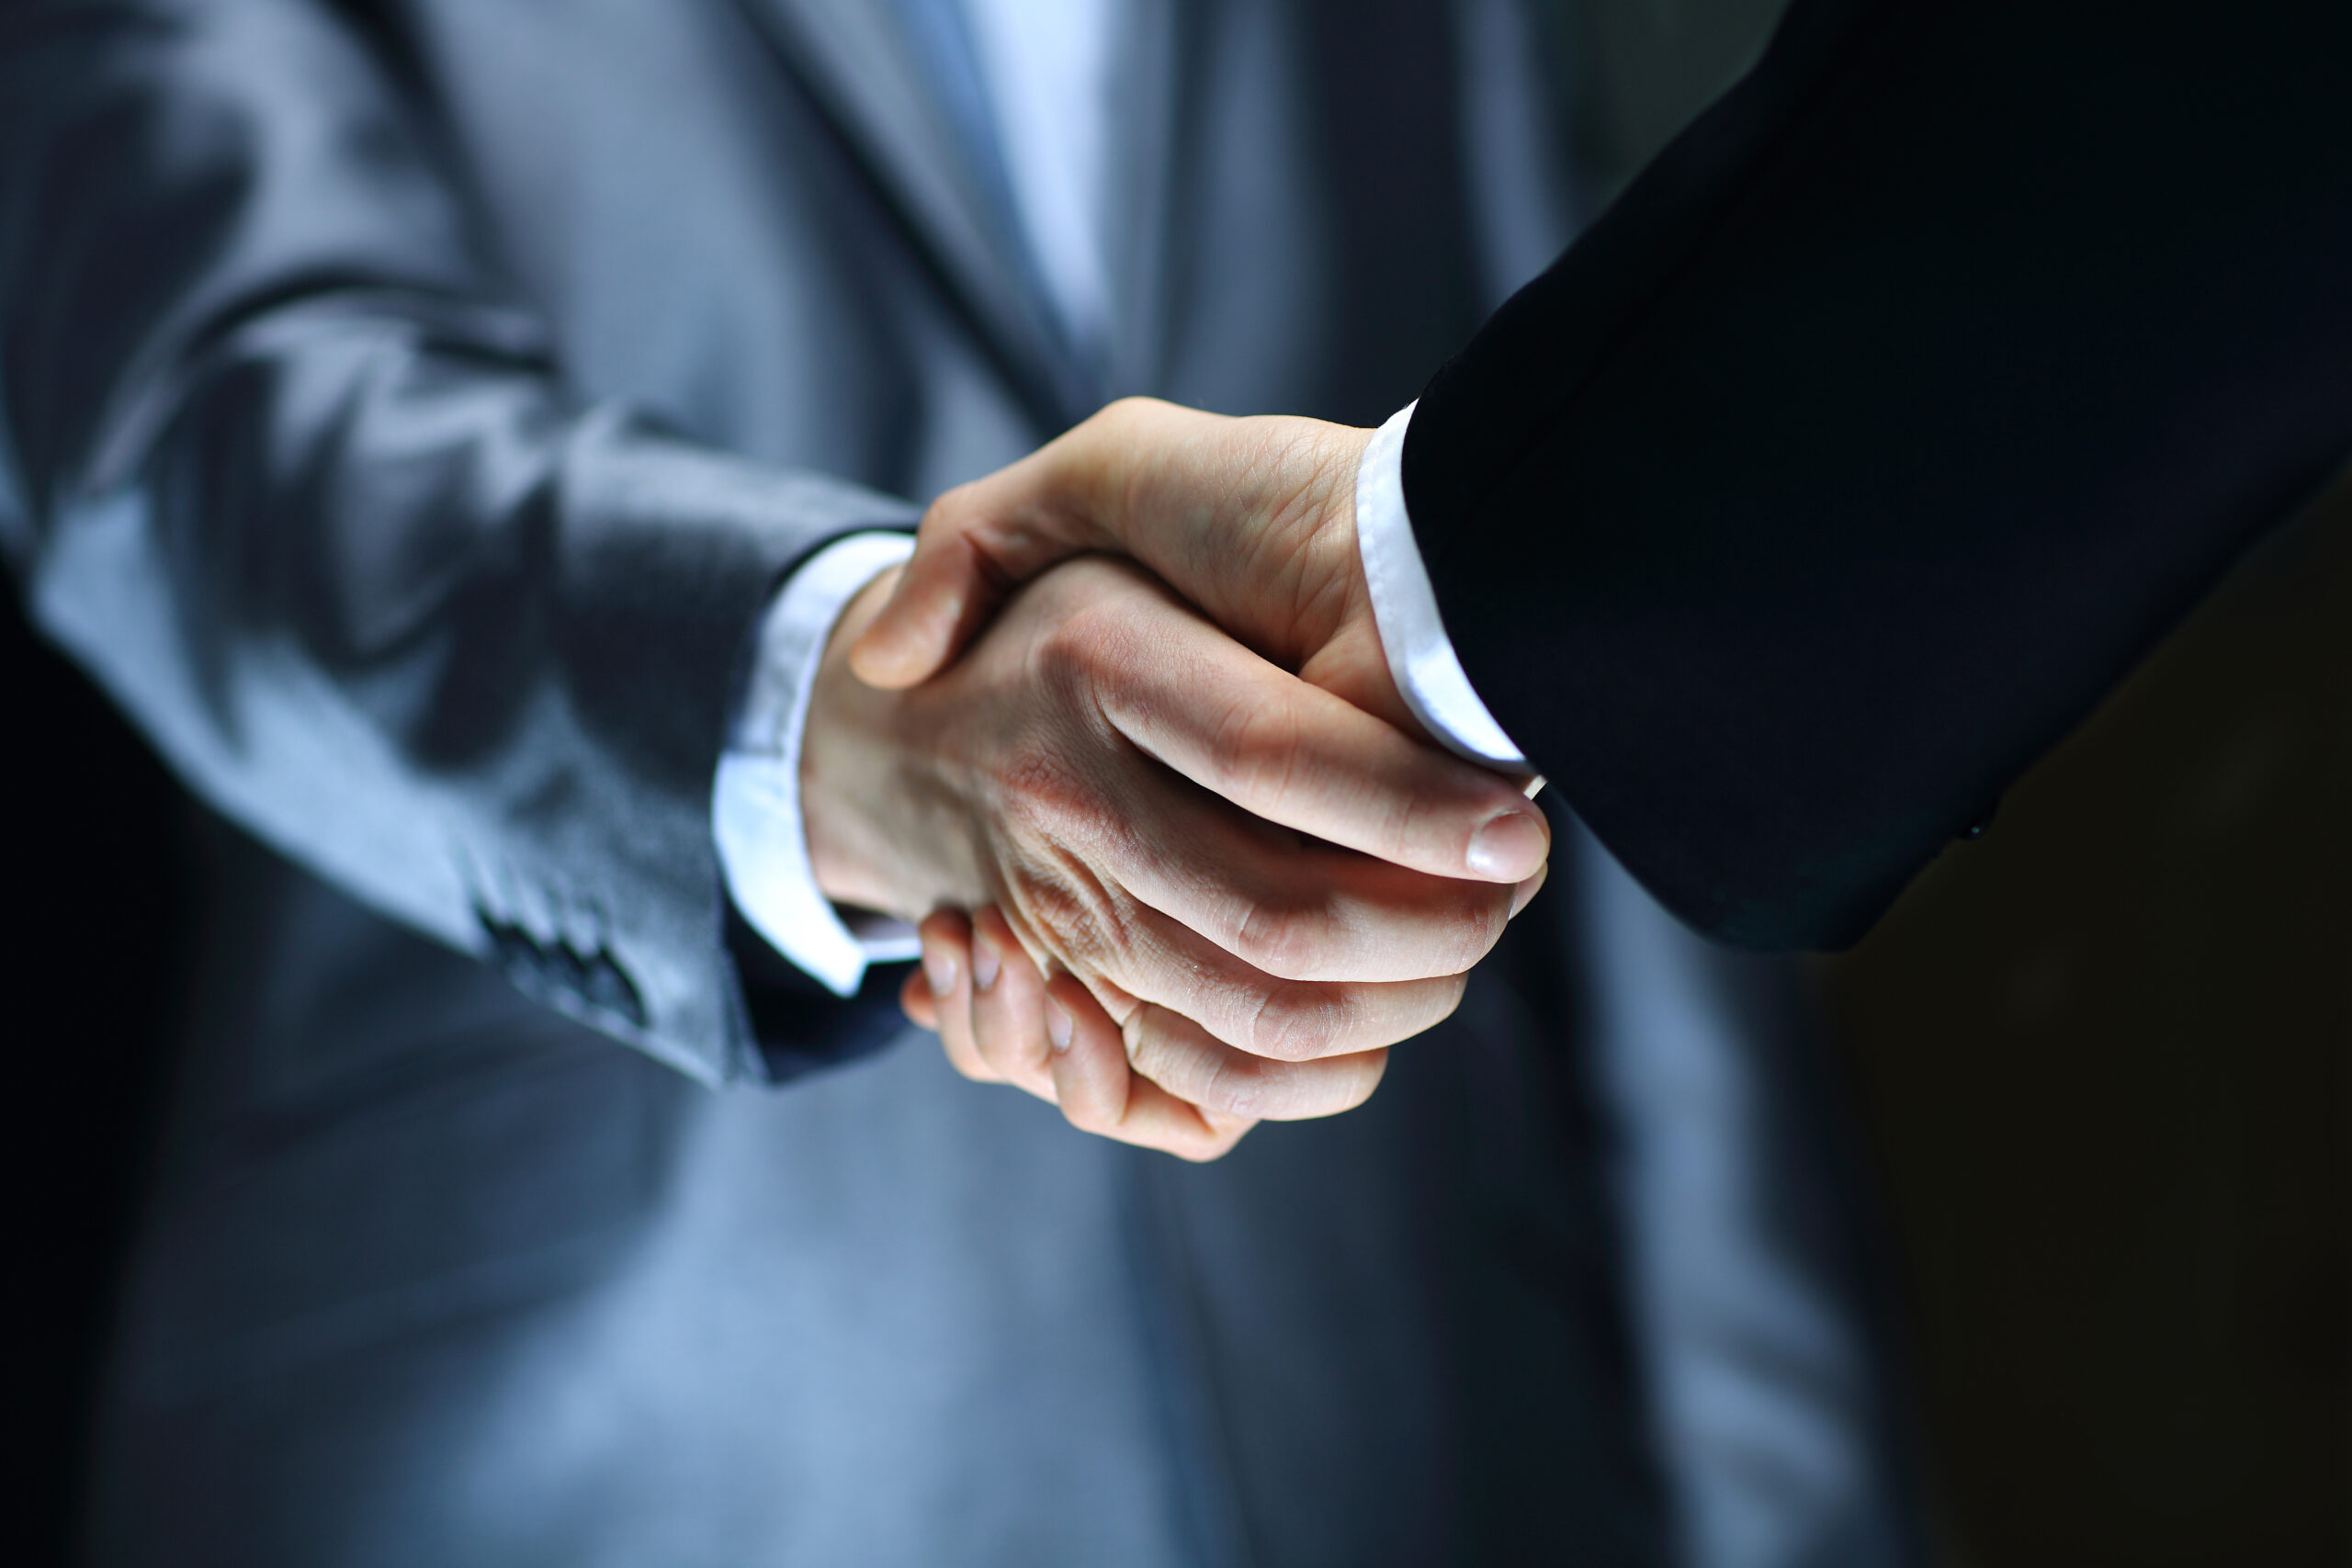 An image of two people shaking hands in a professional gesture of agreement or partnership.